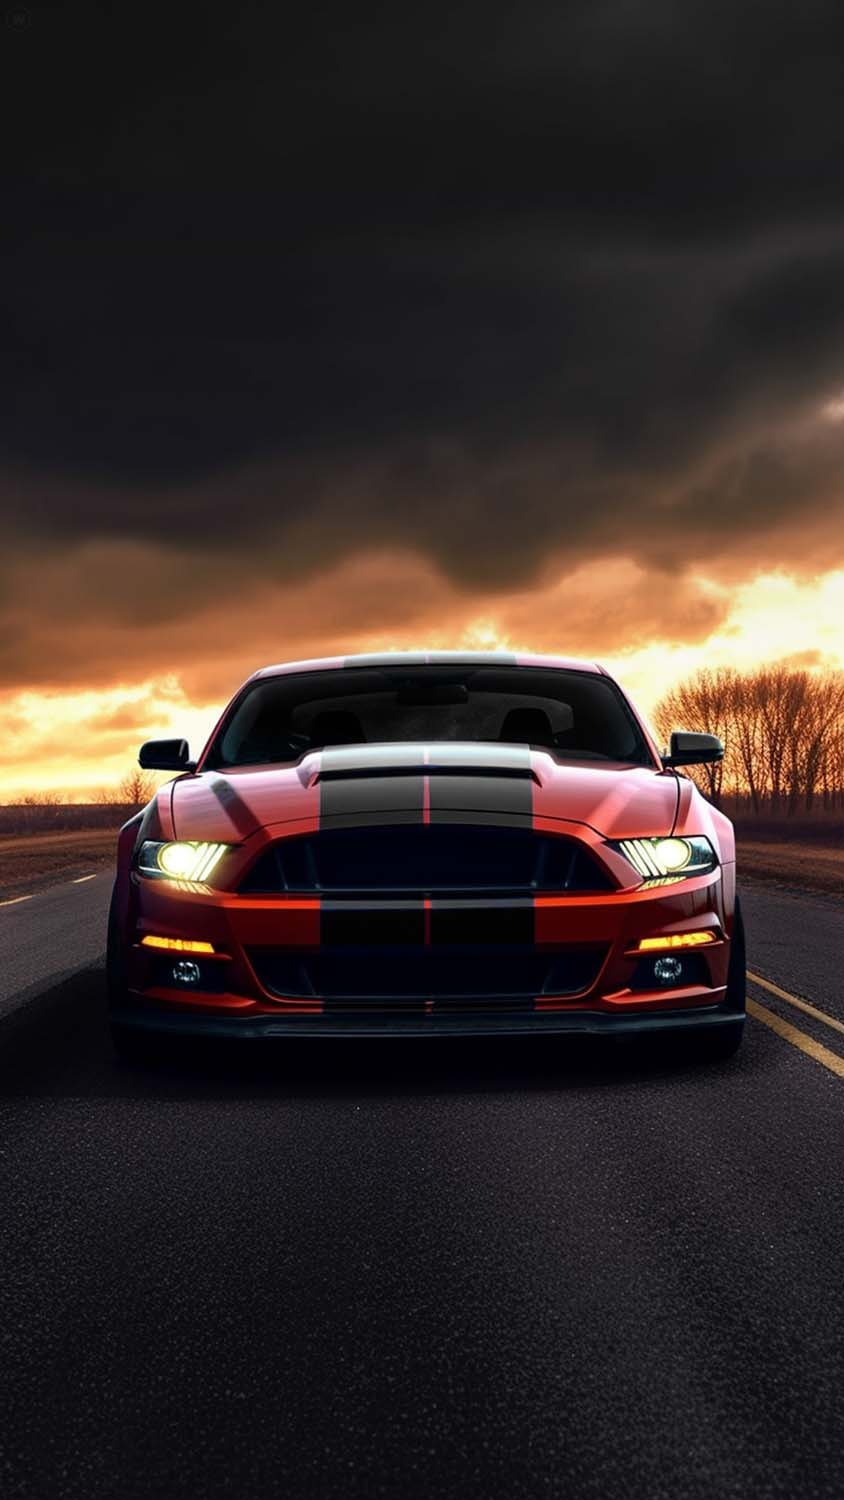 Red Shelby Mustang IPhone Wallpaper  IPhone Wallpapers  iPhone Wallpapers